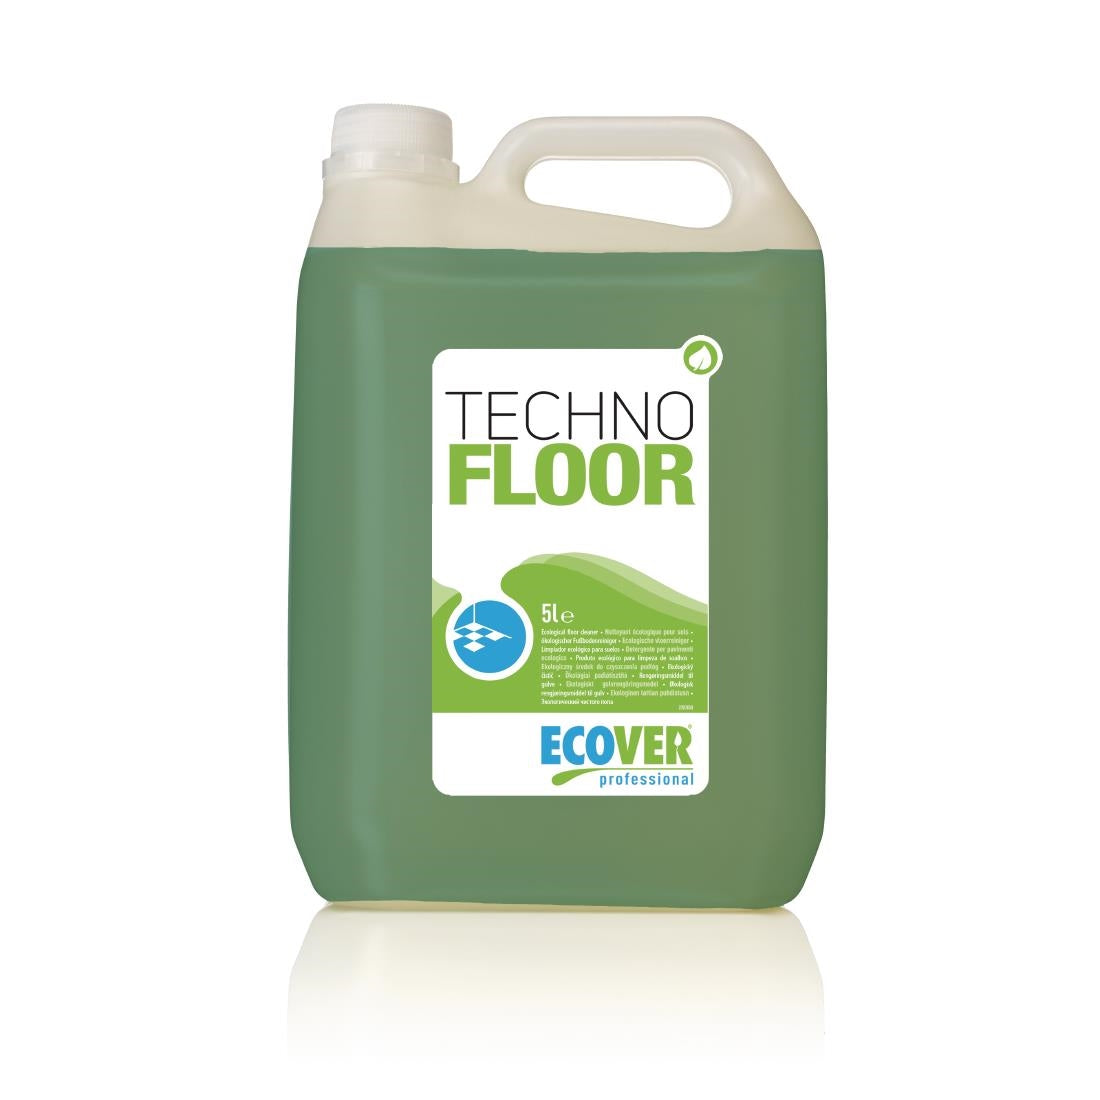 CX170 Greenspeed Techno Floor Cleaner Concentrate 5Ltr JD Catering Equipment Solutions Ltd